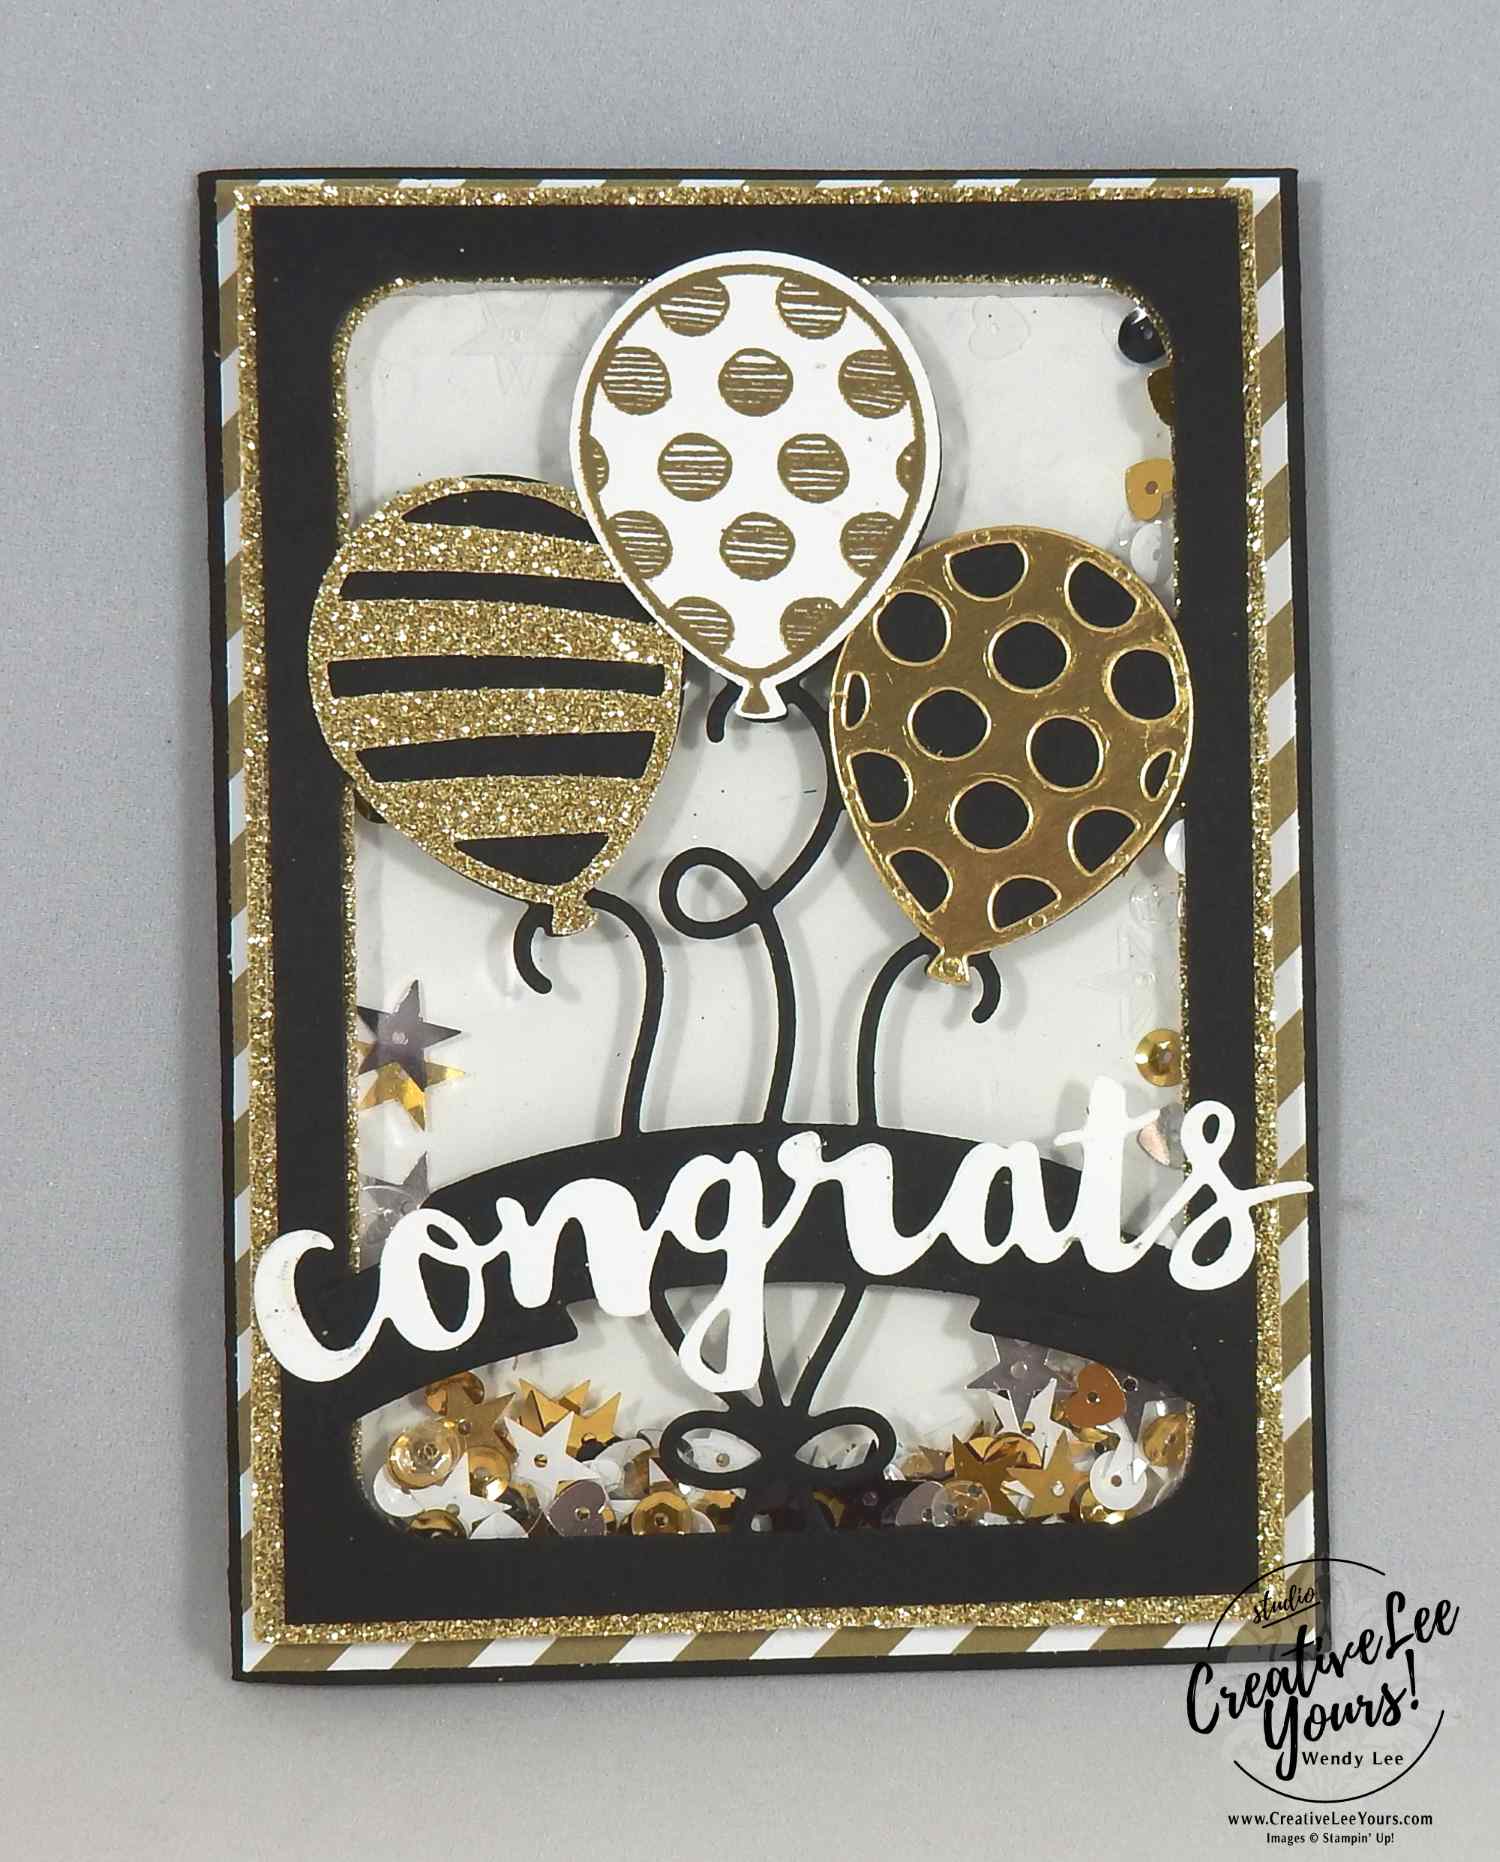 Congrats Shaker by Wendy Lee, Stampin Up, May 2017 FMN class,masculine card, balloon adventures stamp set, balloon pop up thinlits, sunshine wishes thinlits, #creativeleeyours, creatively yours